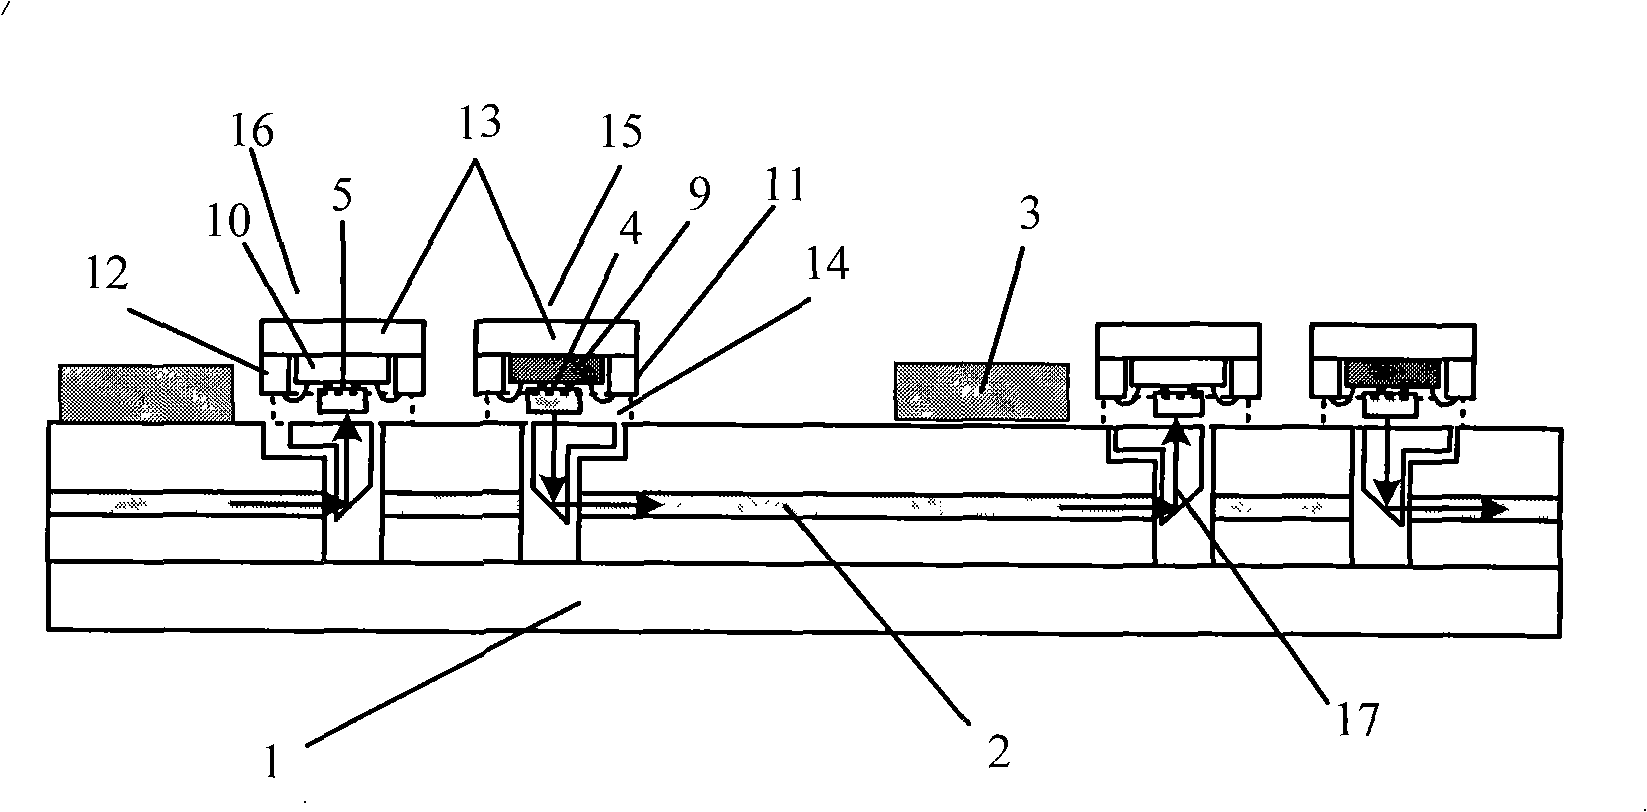 Optoelectronic combination printing circuit board with optical interconnection direct coupling between chips